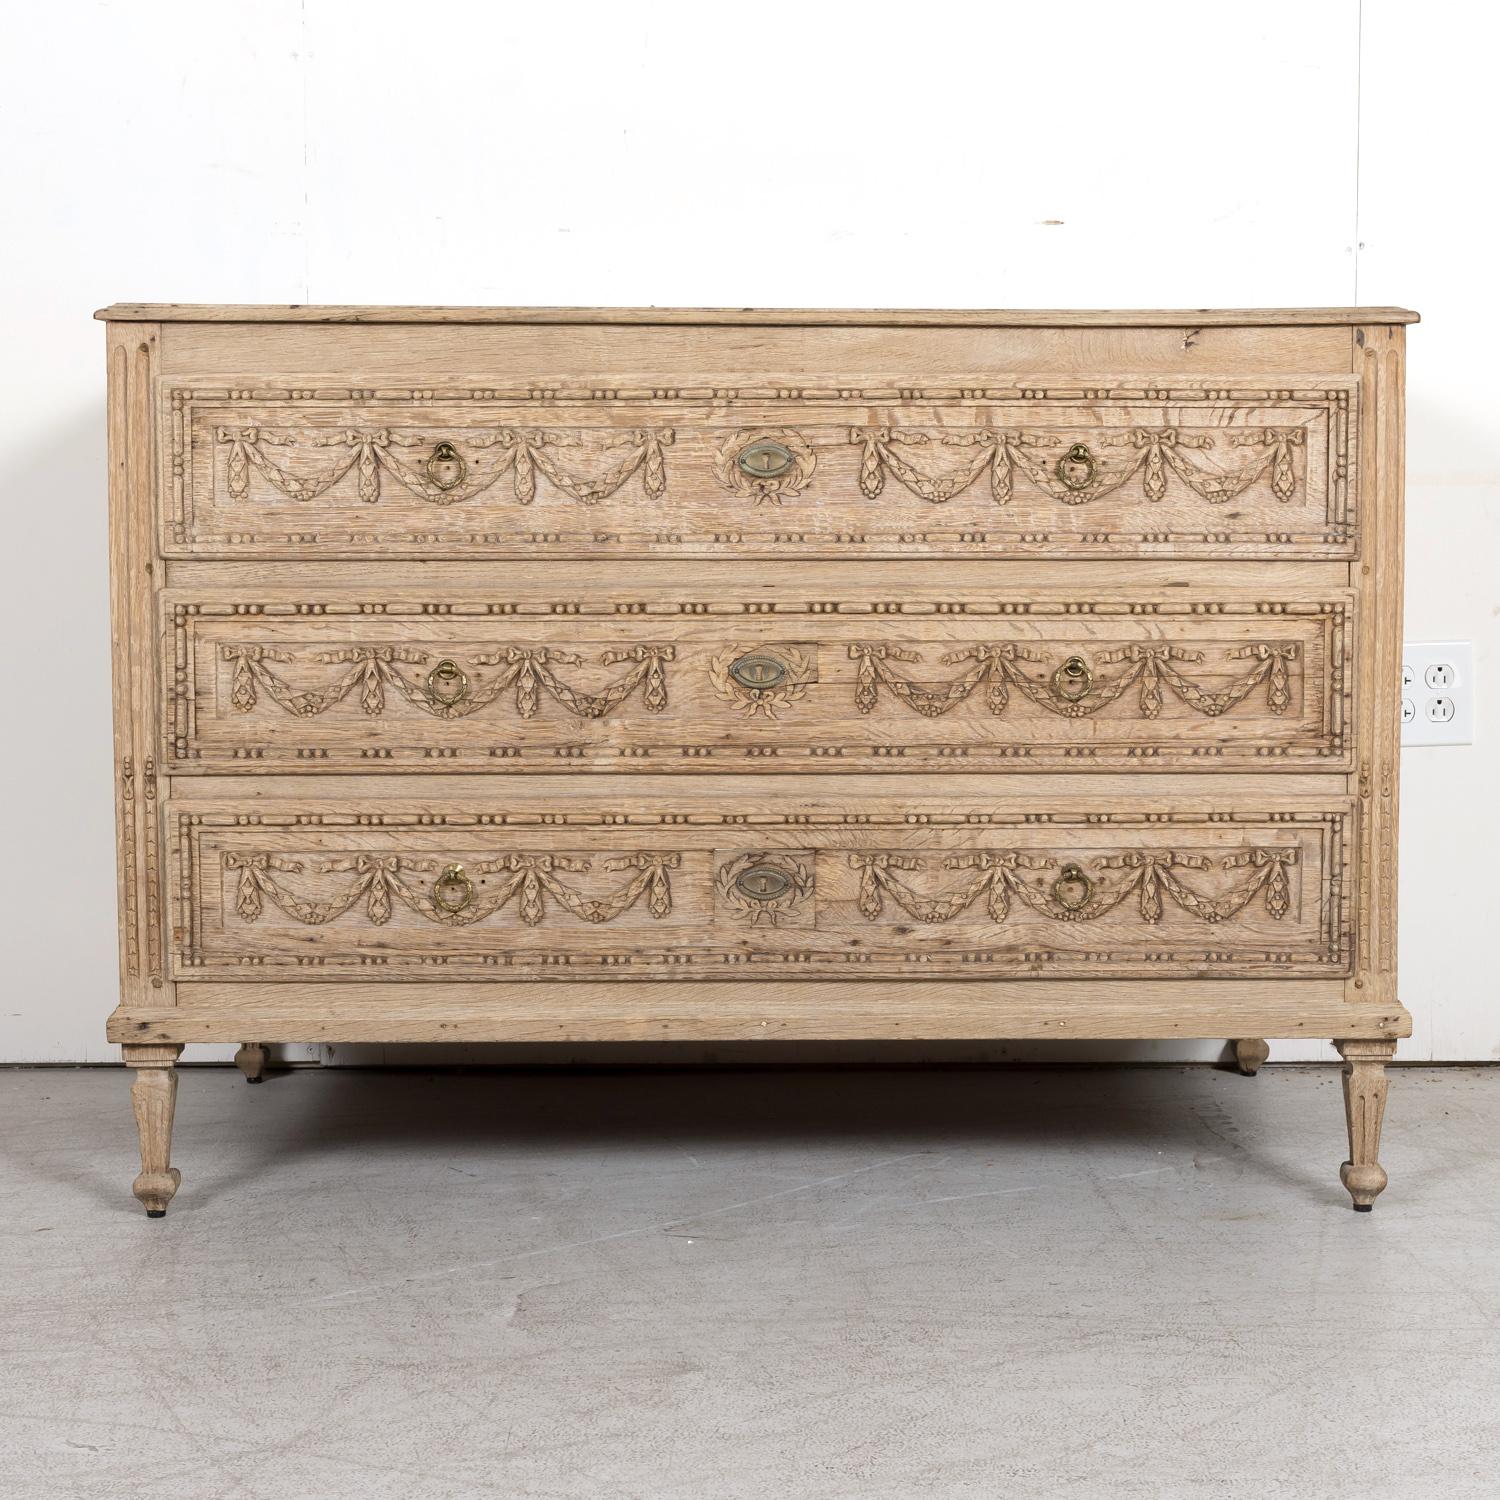 Brass Early 19th Century French Louis XVI Style Bleached Oak Provençal Commode